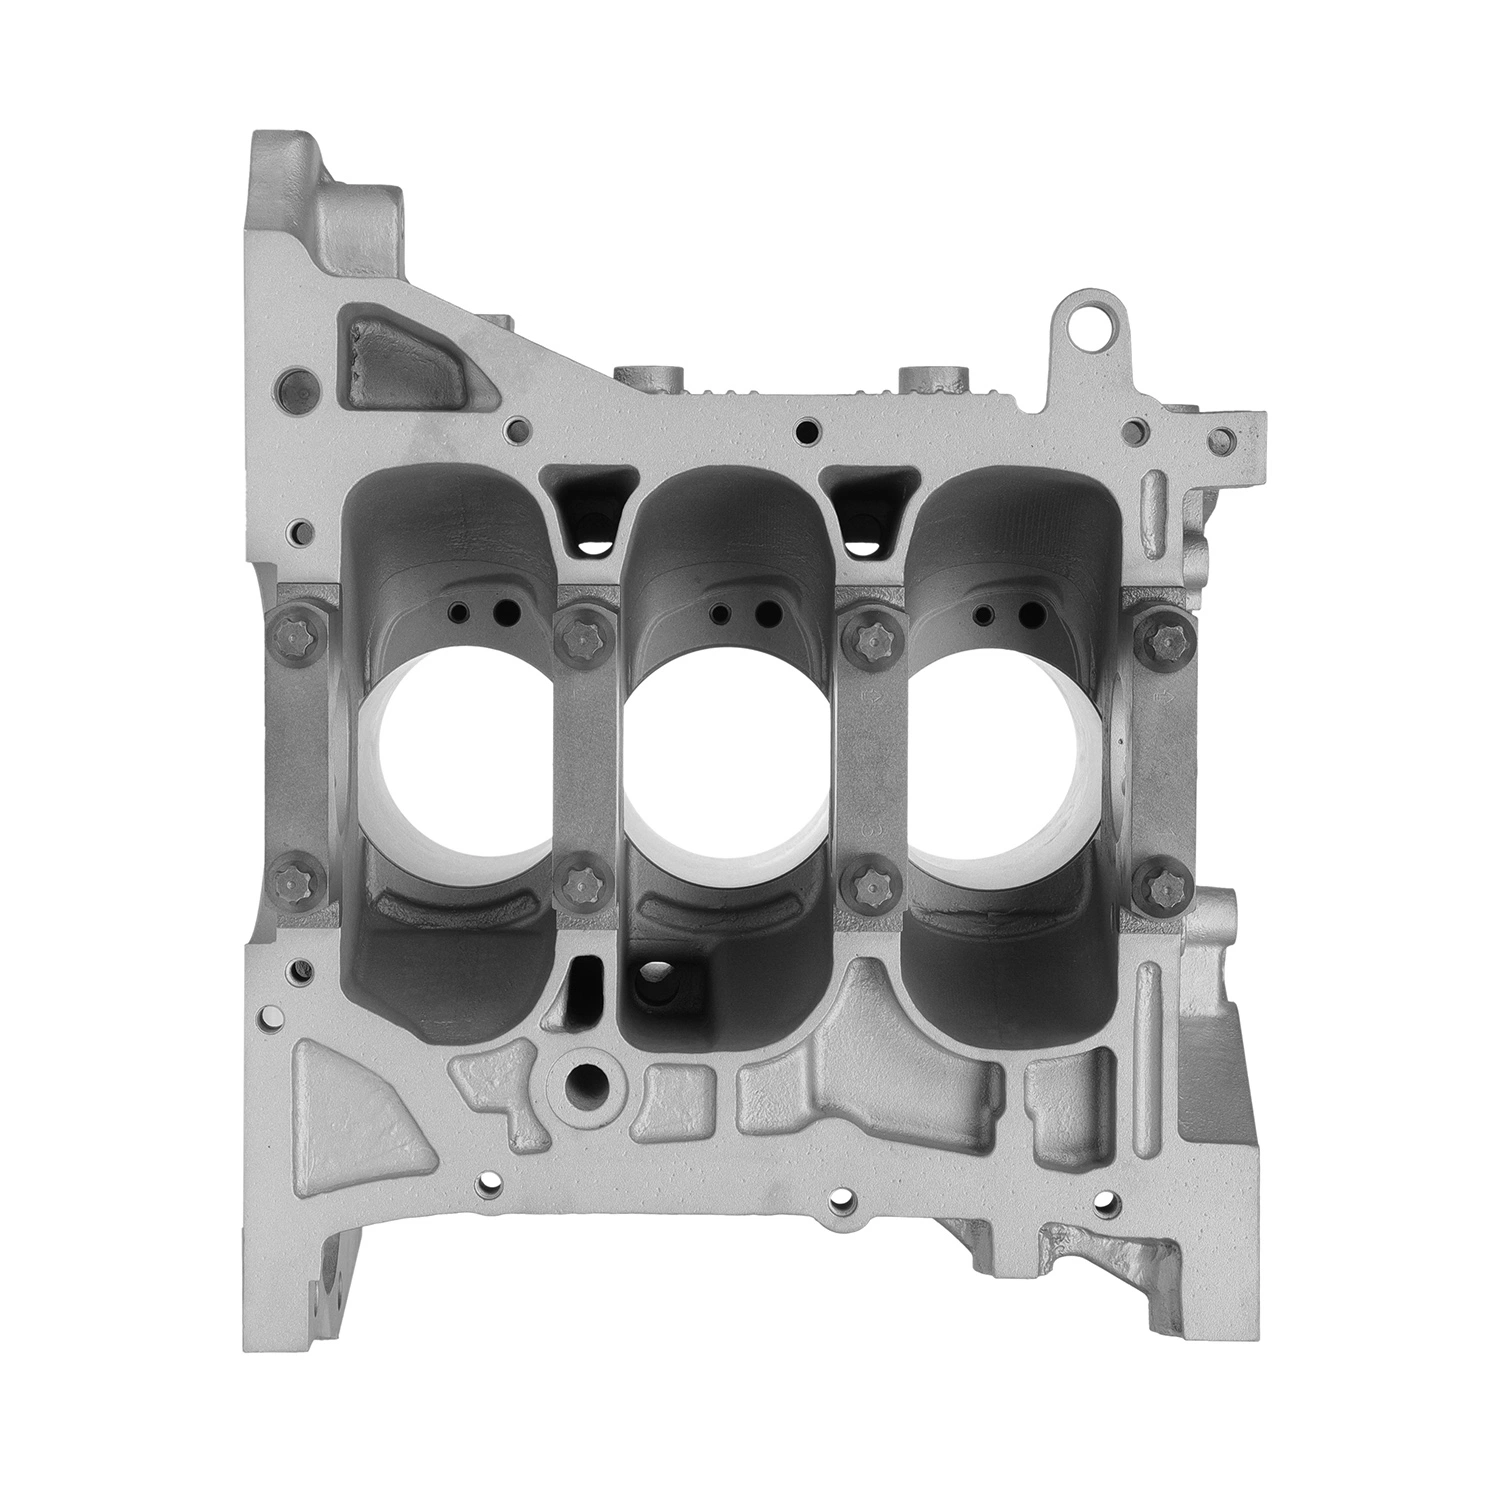 Sand Industrial OEM Customized 3D Printing Sand Casting Cast Aluminum Spare Part Machinery Part by Rapid Prototyping & CNC Machining